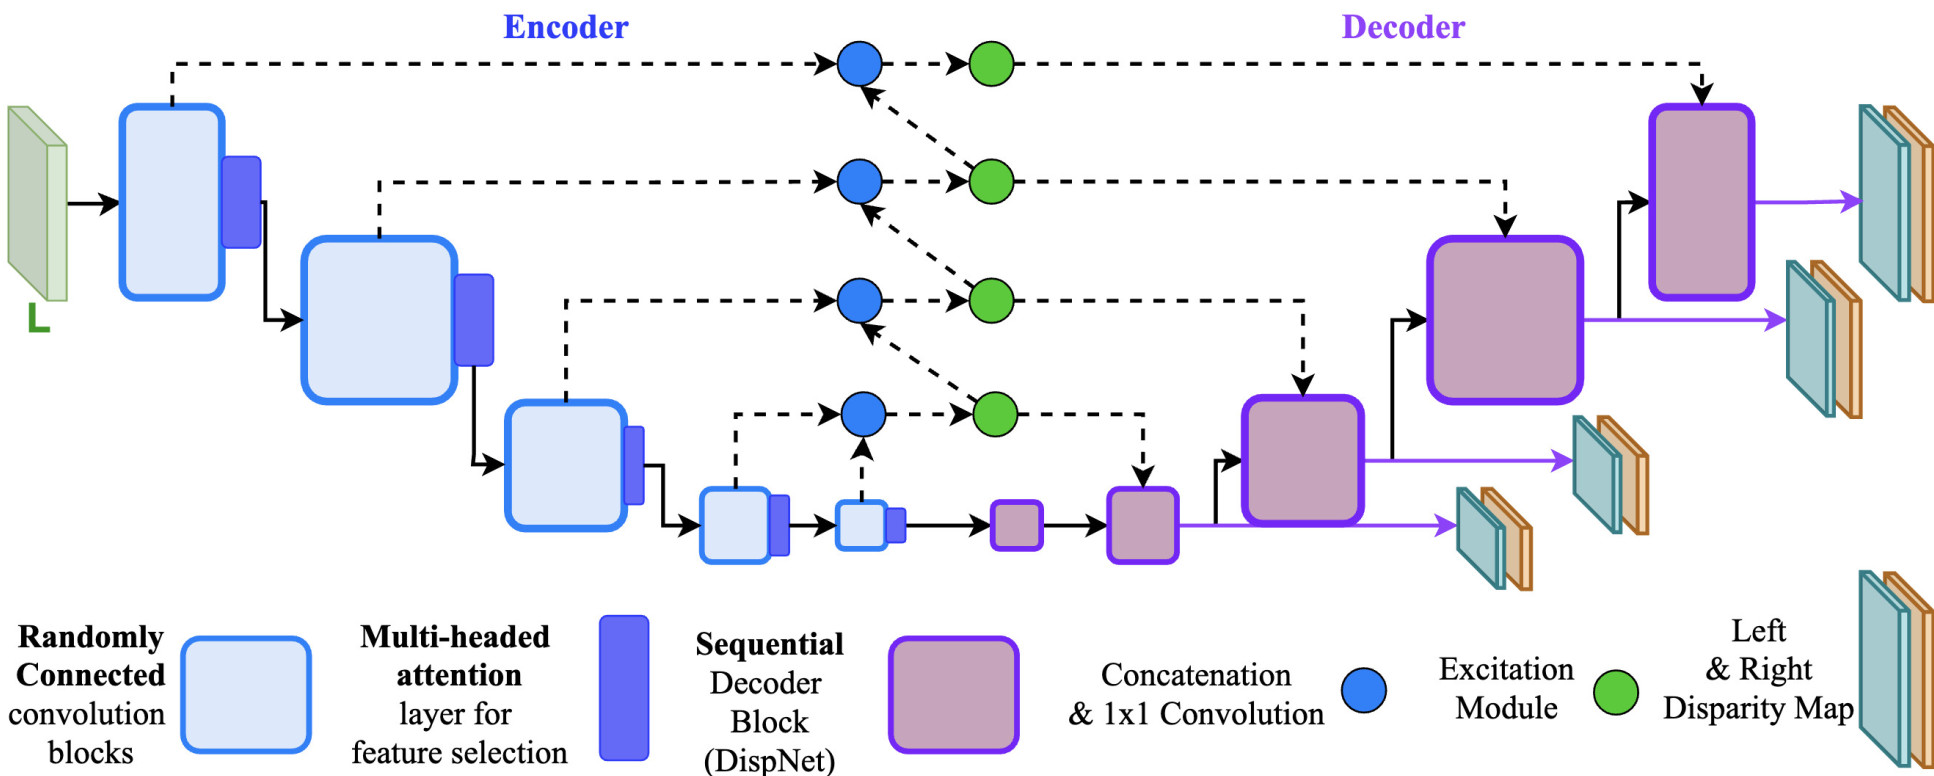 The proposed encoder-decoder architecture. The solid and the dotted lines denote forward propagation and skip connections, respectively. The purple lines signify the output left and right disparity maps generated at 4 scales, each increasing hierarchically with a scale factor of 2.